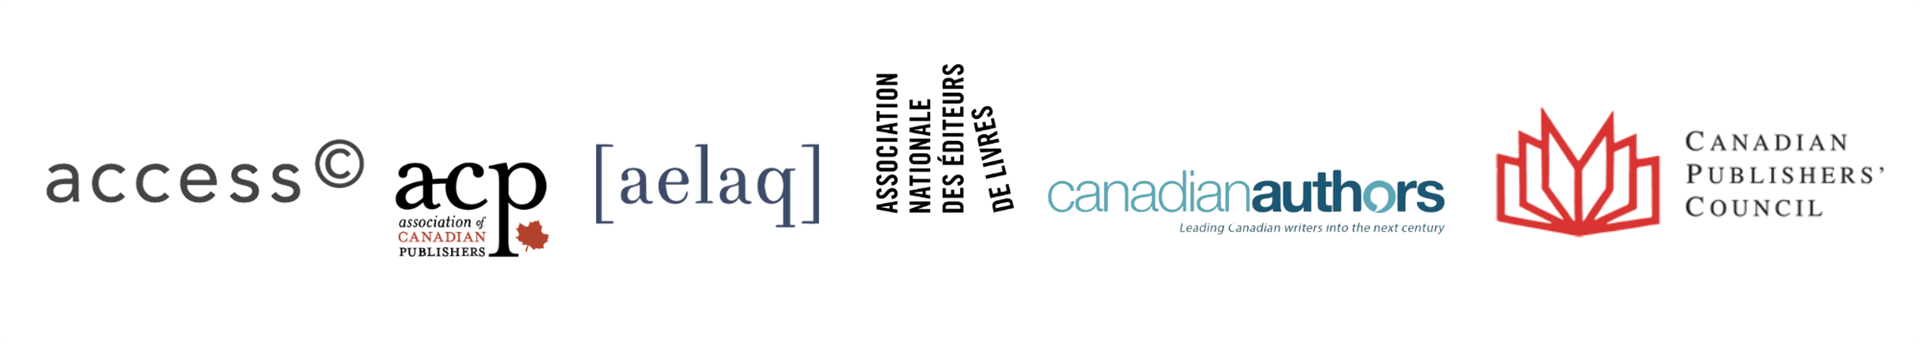 The logos for Access Copyright, ACP, AELEAG, ANEL, Canadian Authors, and Canadian Publishers' Council.